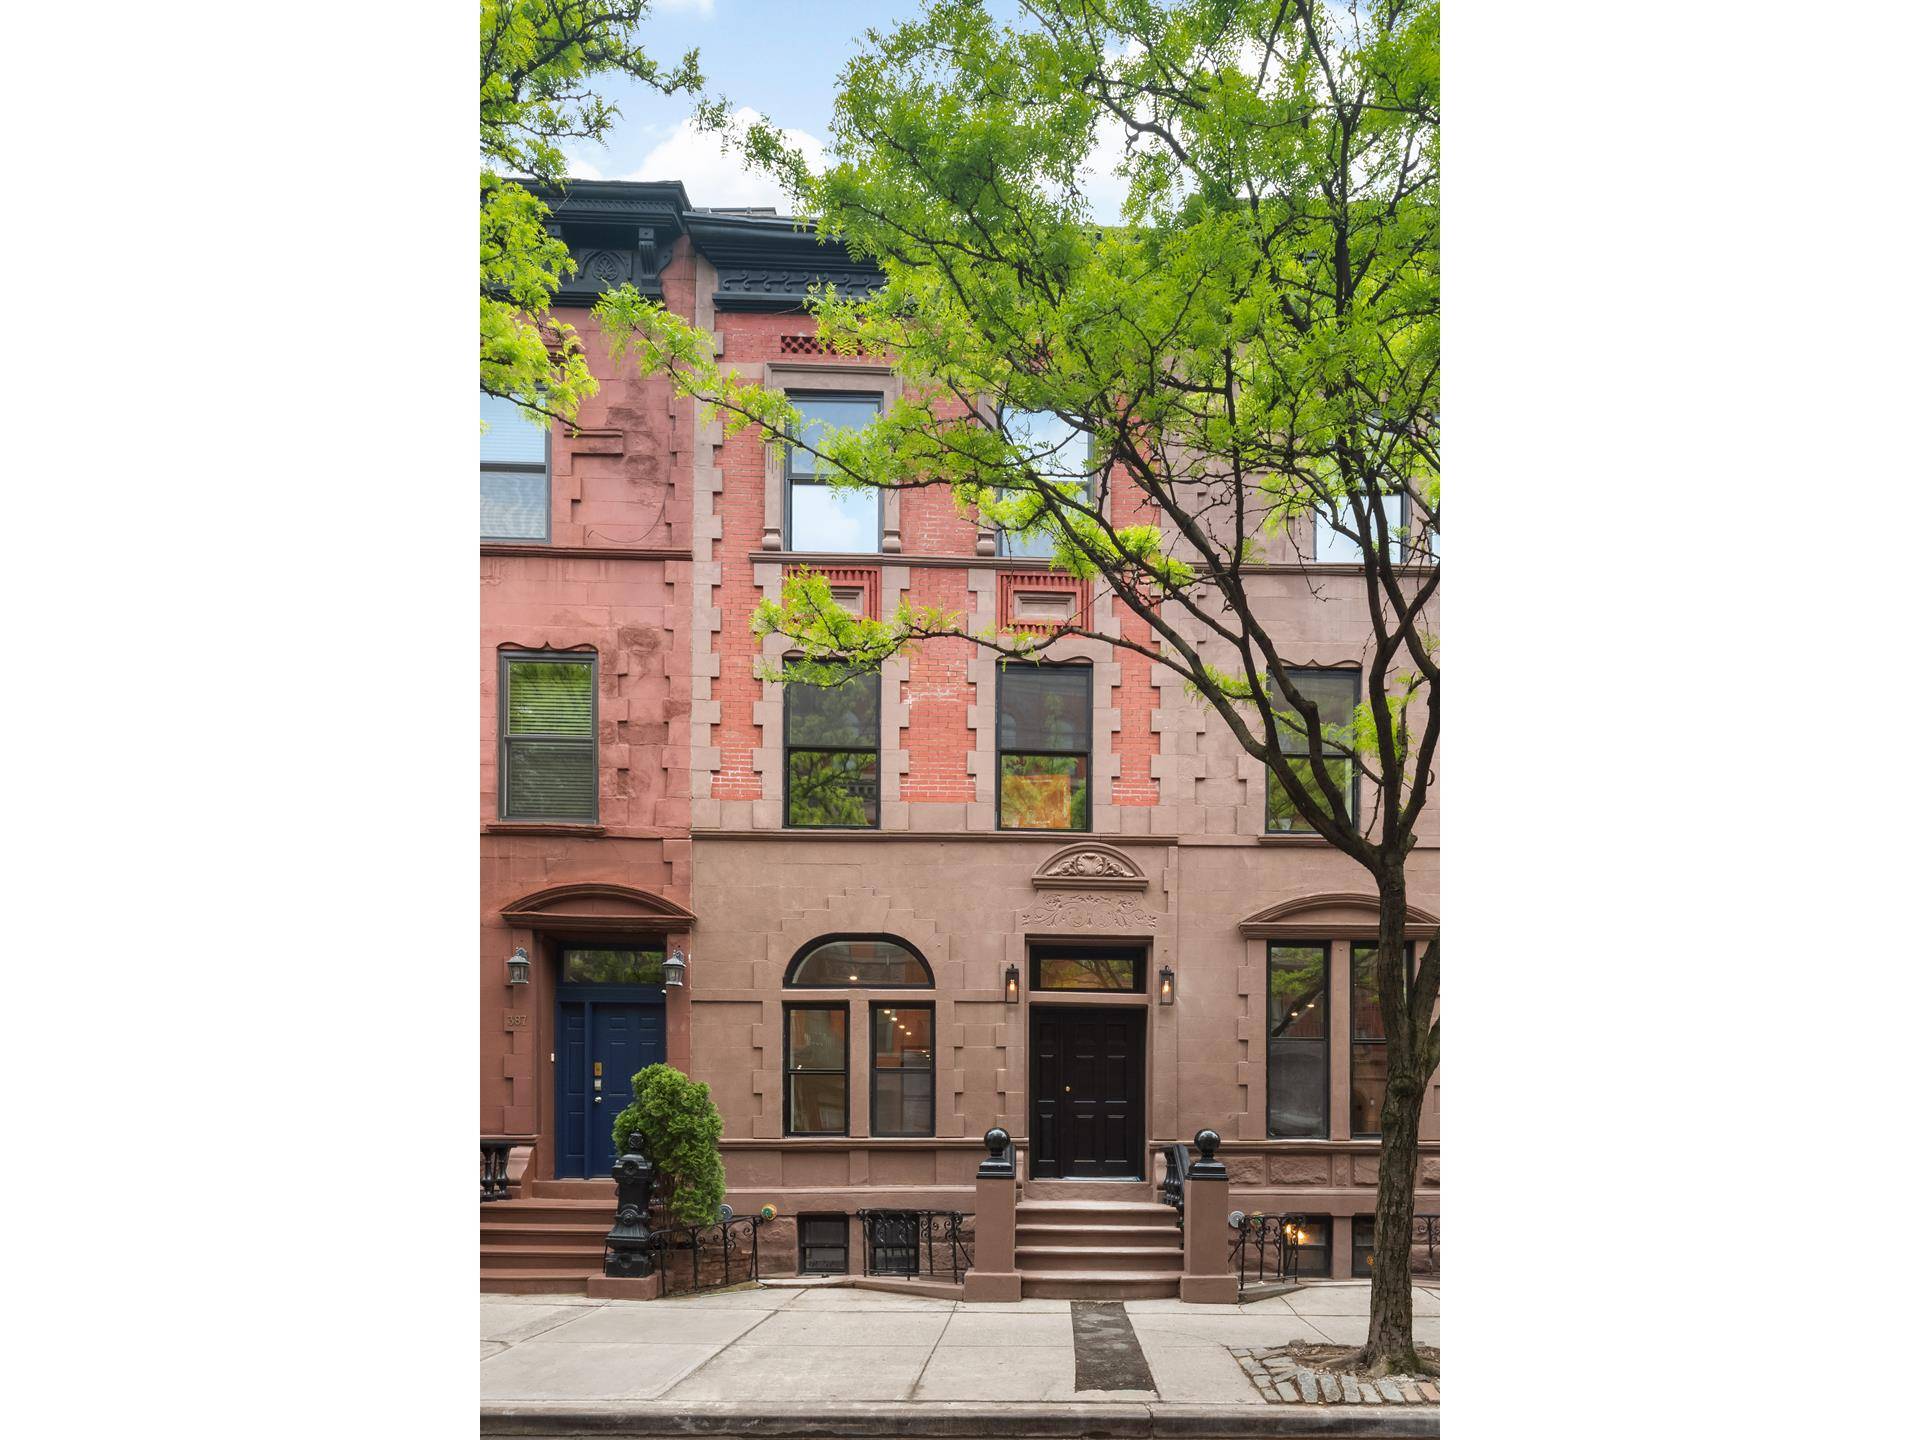 This 18 foot wide, three bedroom, three and a half bathroom single family home spanning a 2728 sf interior features the charming facade of a traditional South Harlem brownstone.